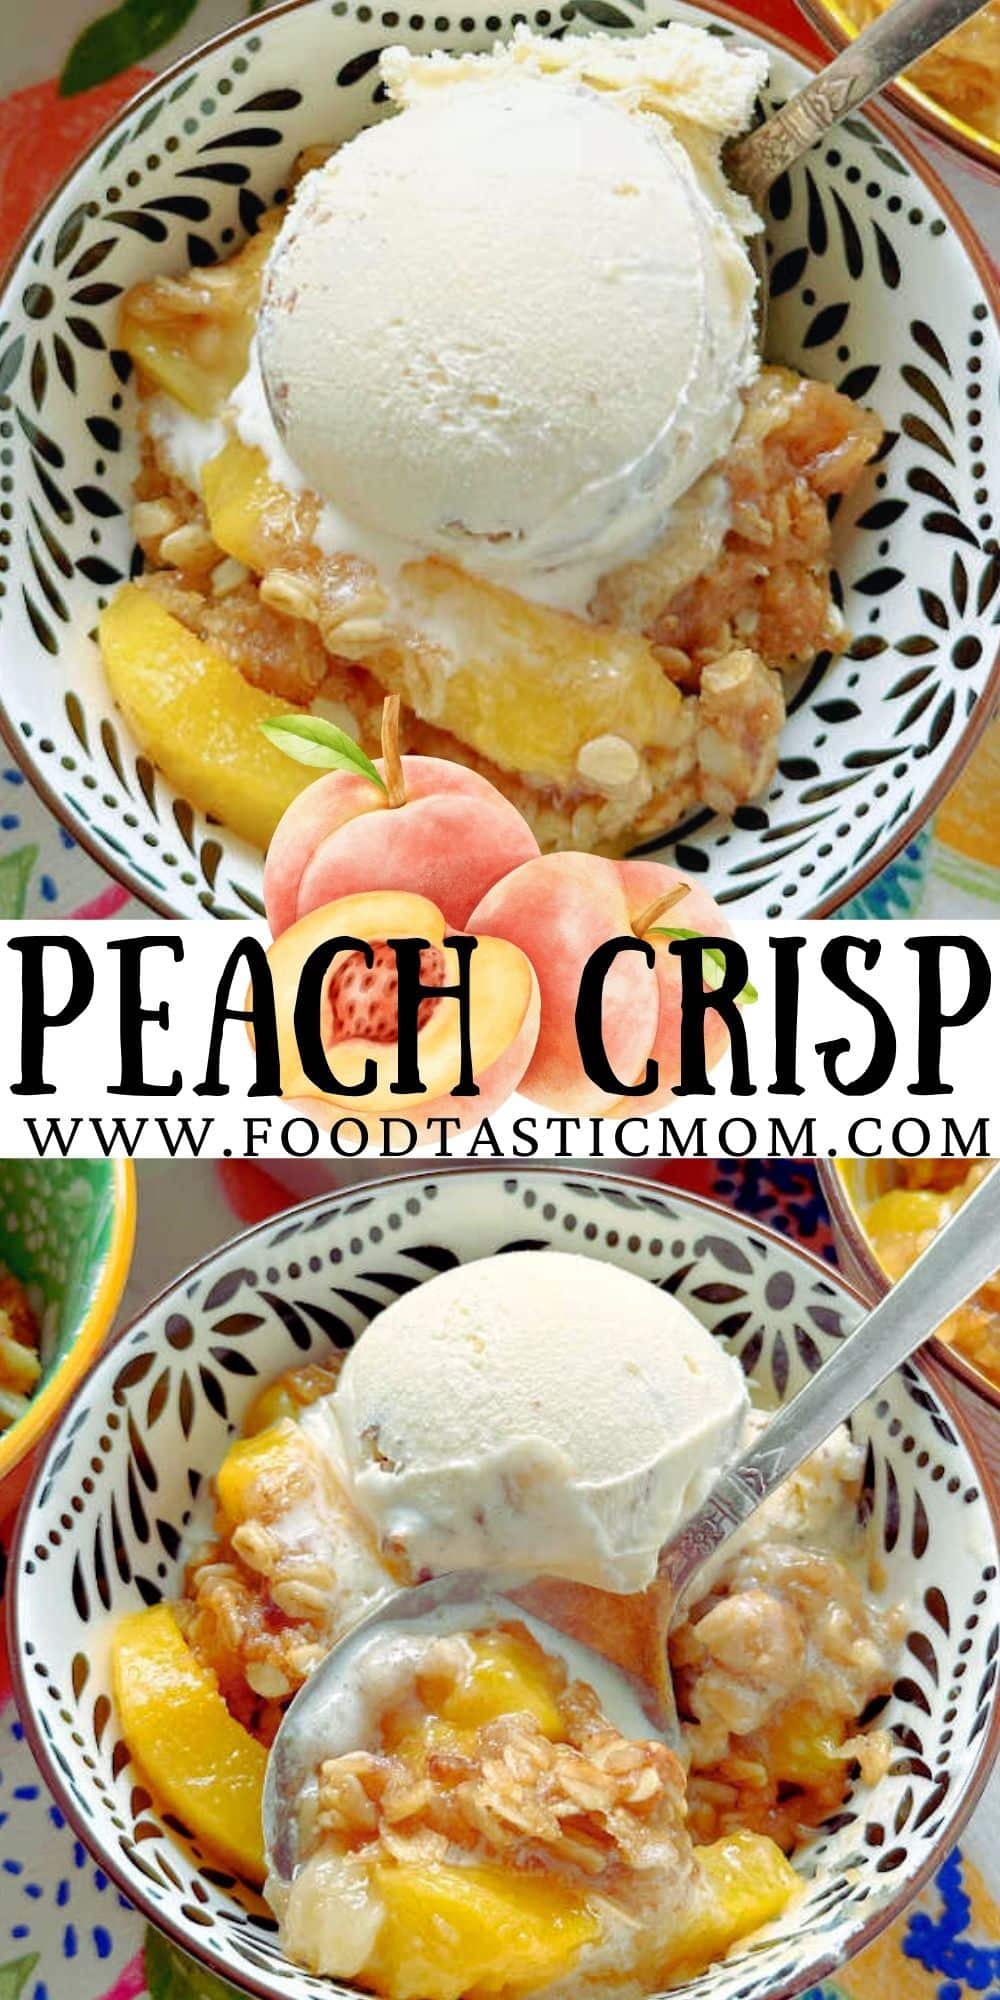 Bourbon Peach Crisp is the perfect dessert to show off the season's best peaches, kissed with bourbon and maple syrup flavor and the most delicious crumble topping.  via @foodtasticmom